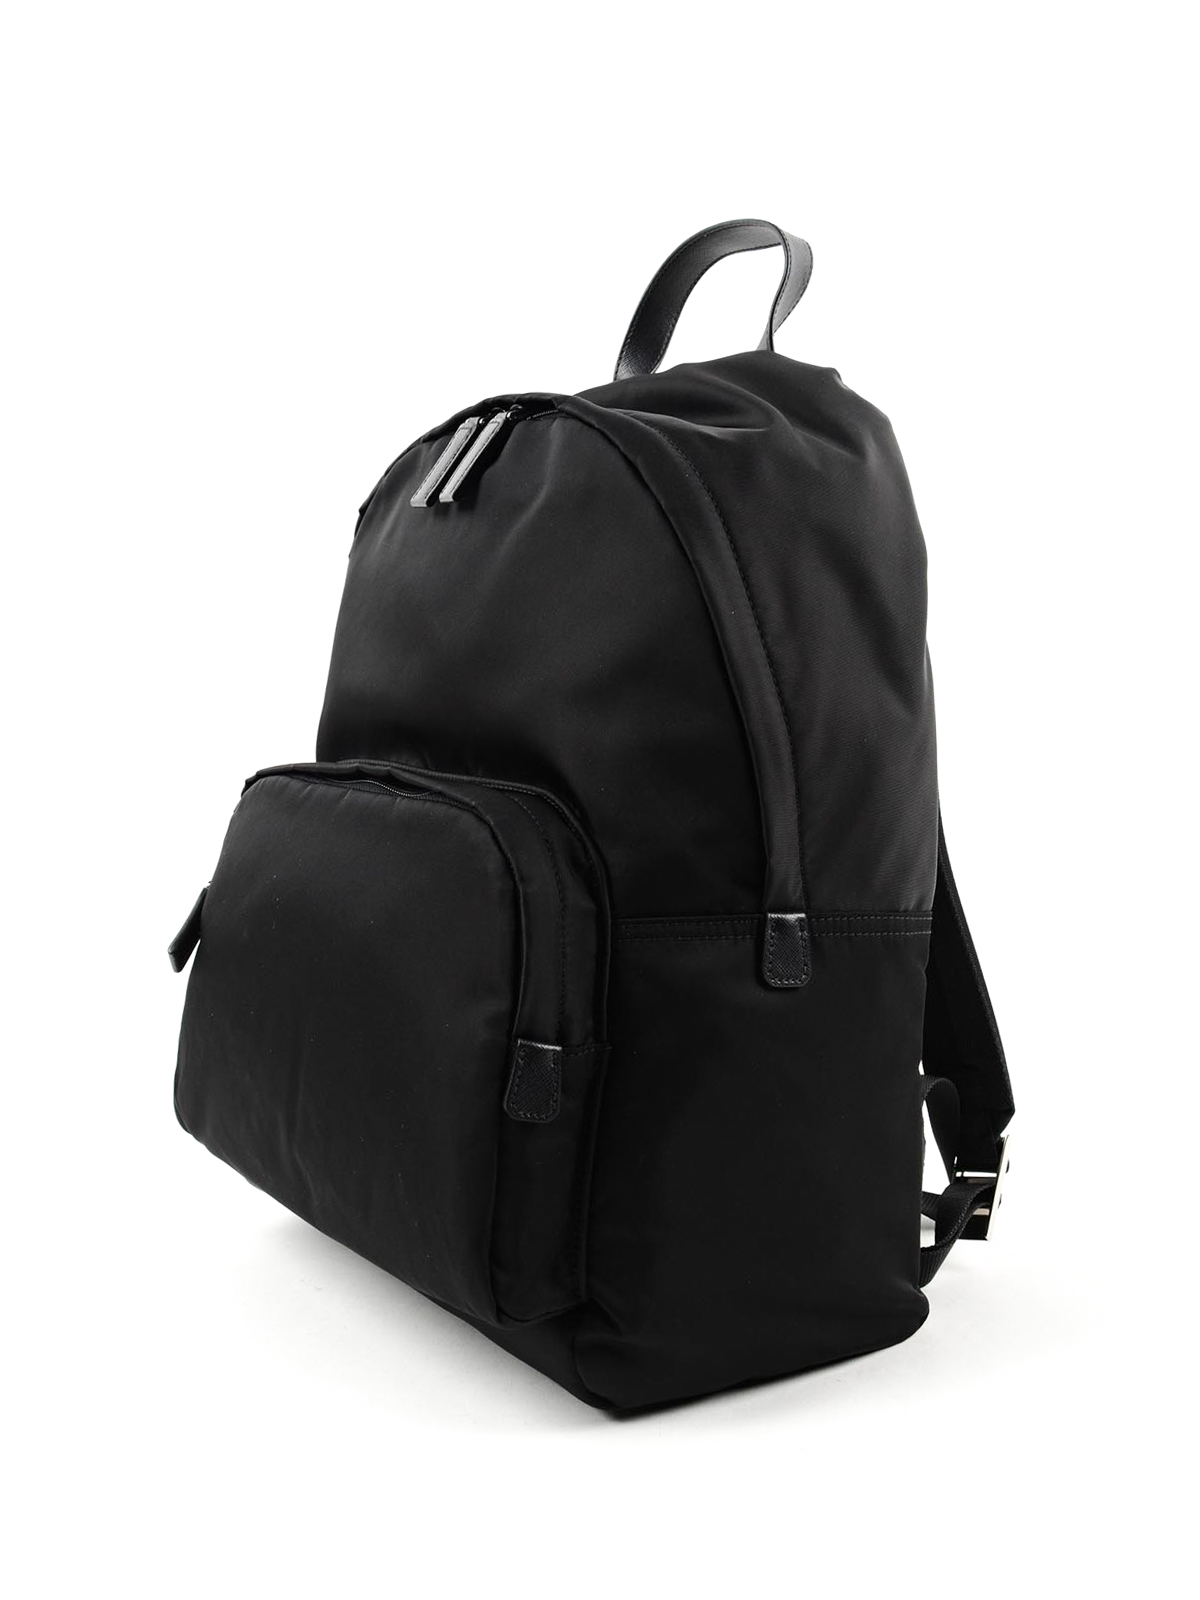 https://images.thebestshops.com/product_images/original/prada-online-backpacks-fabric-backpack-with-leather-trims-00000099610f00s002.jpg